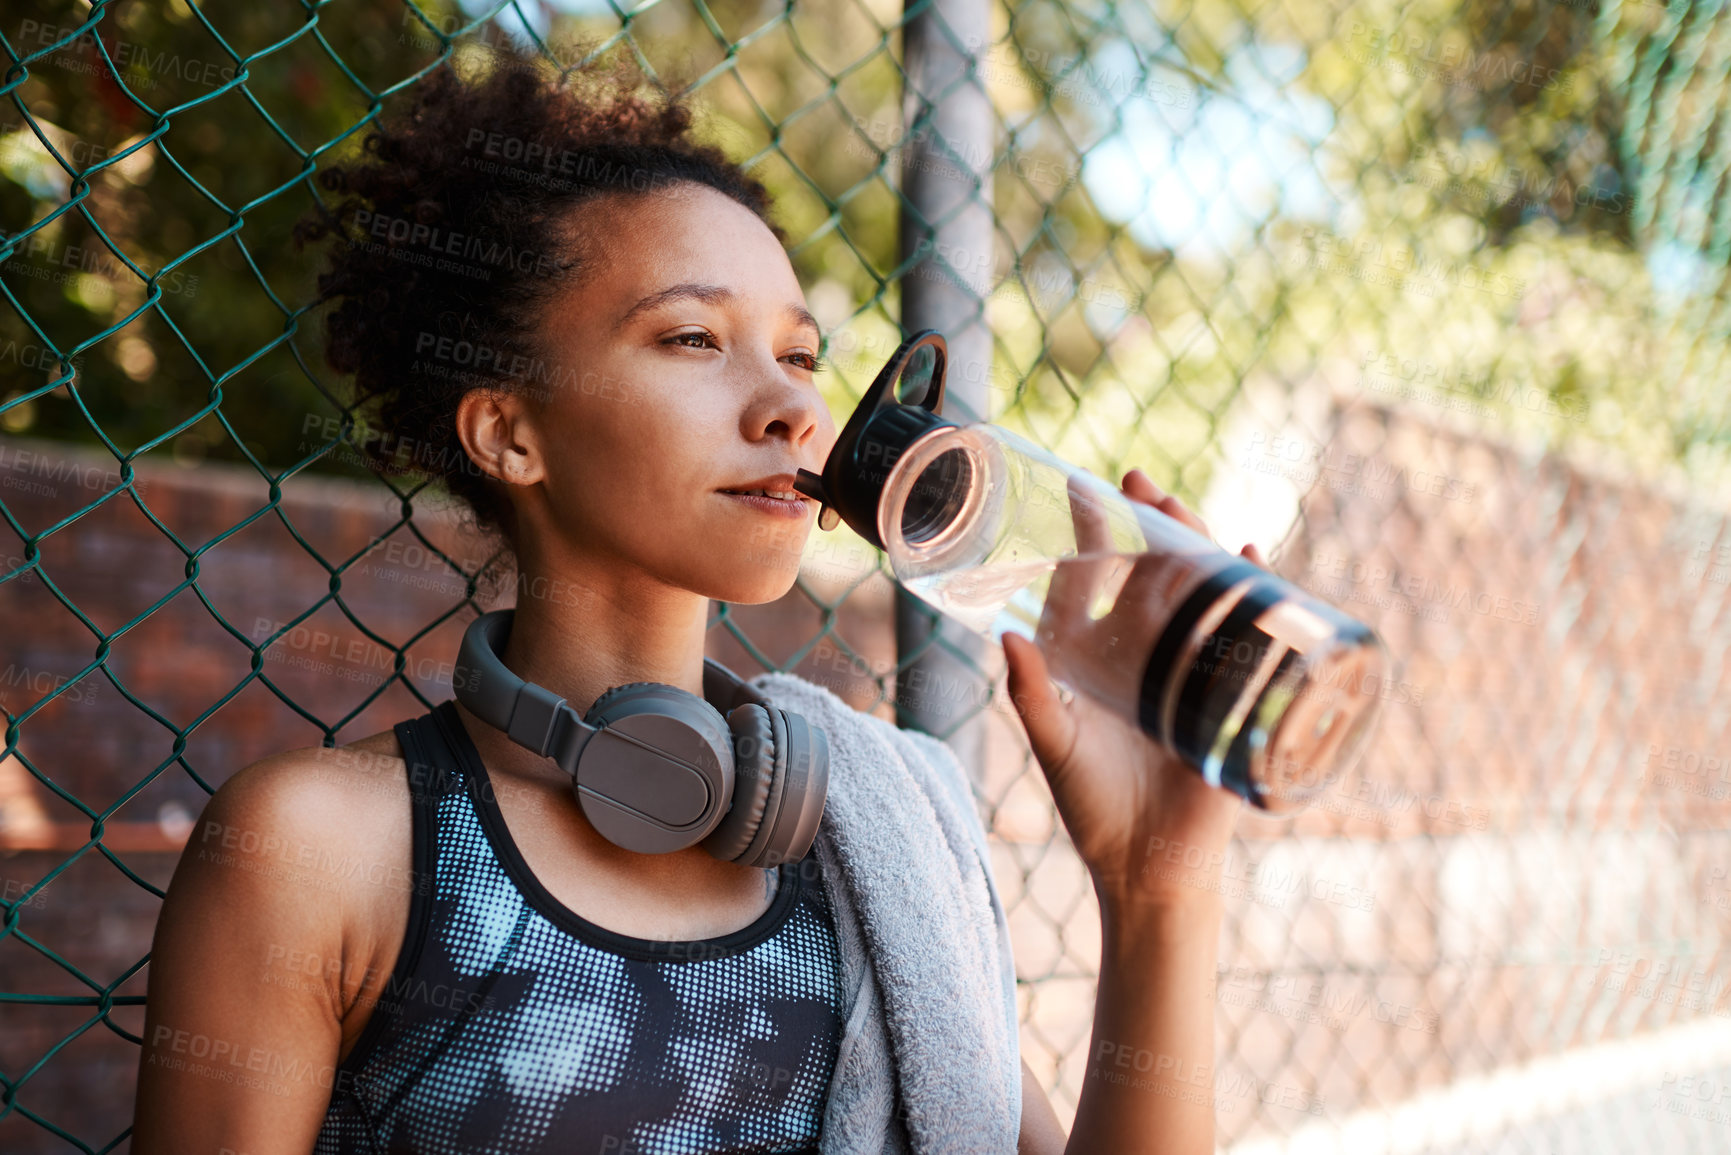 Buy stock photo Shot of a sporty young woman drinking water while standing against a fence outdoors